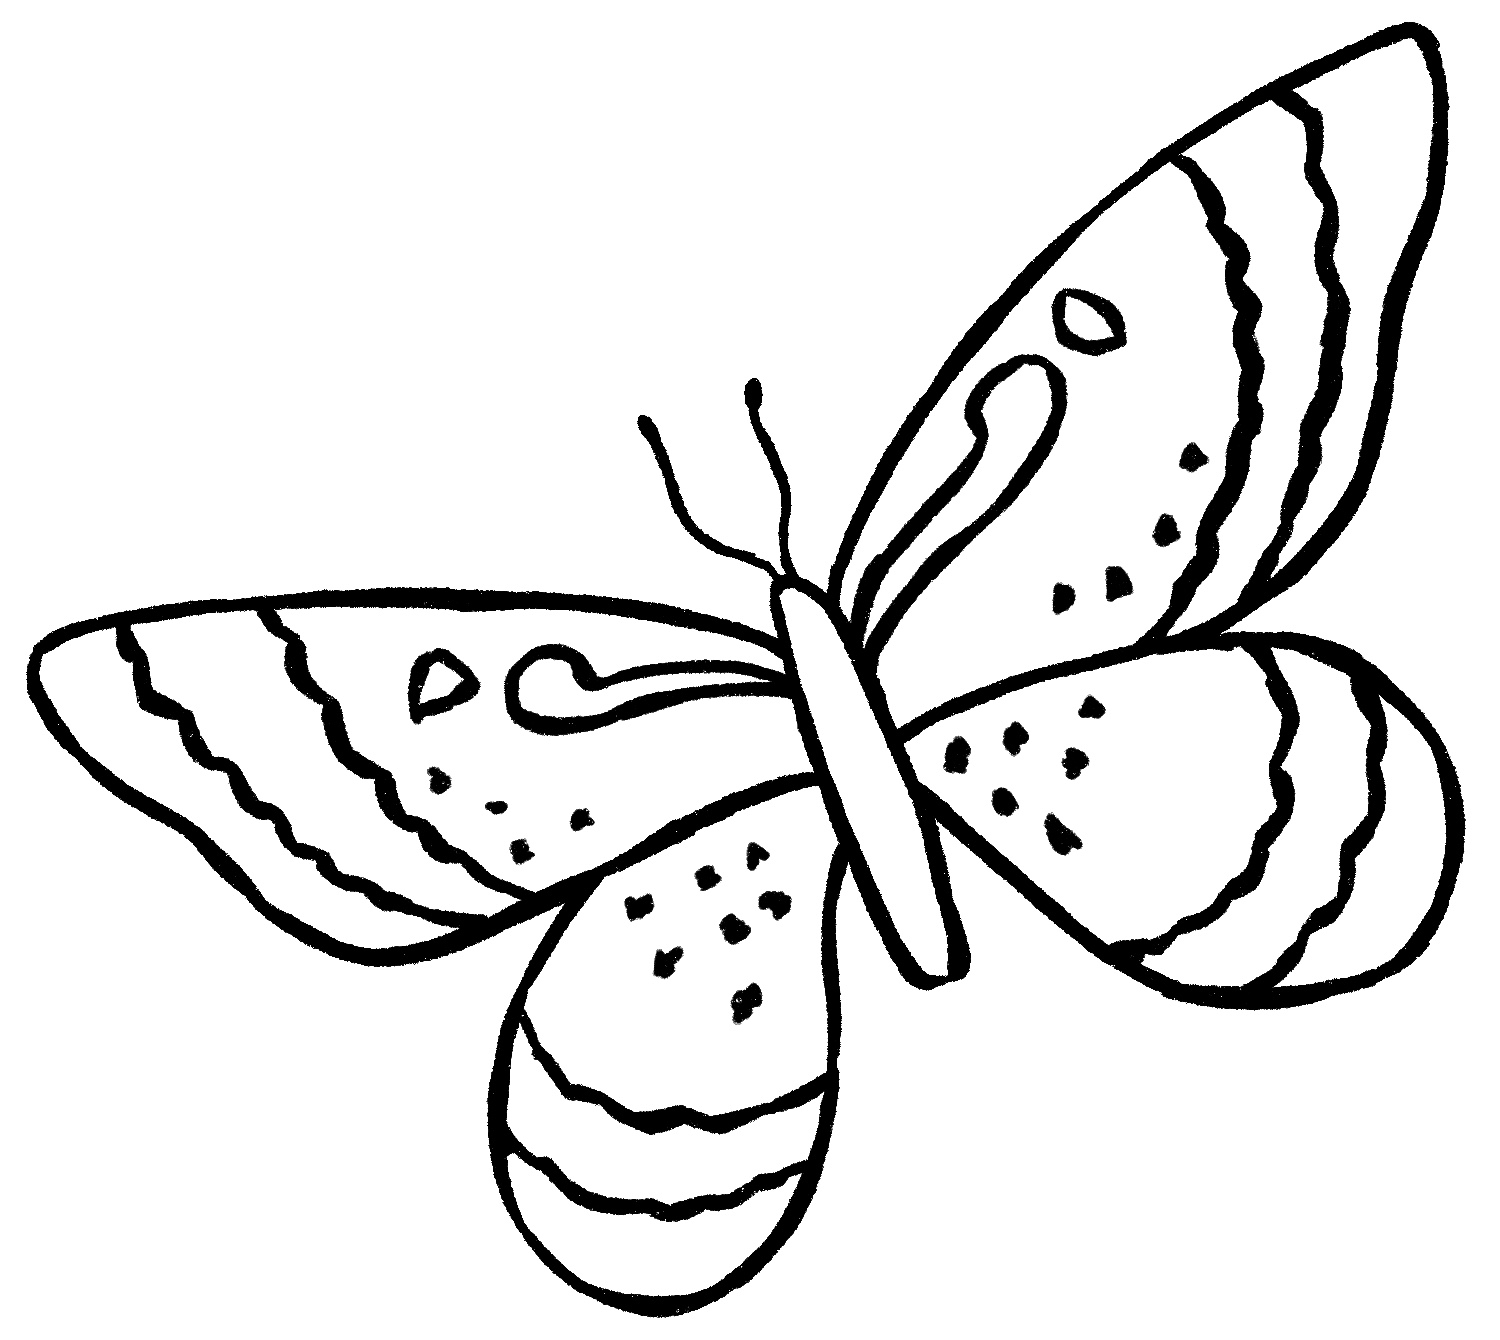 How To Draw A Butterfly Step By Step | by Coloring games online | Medium